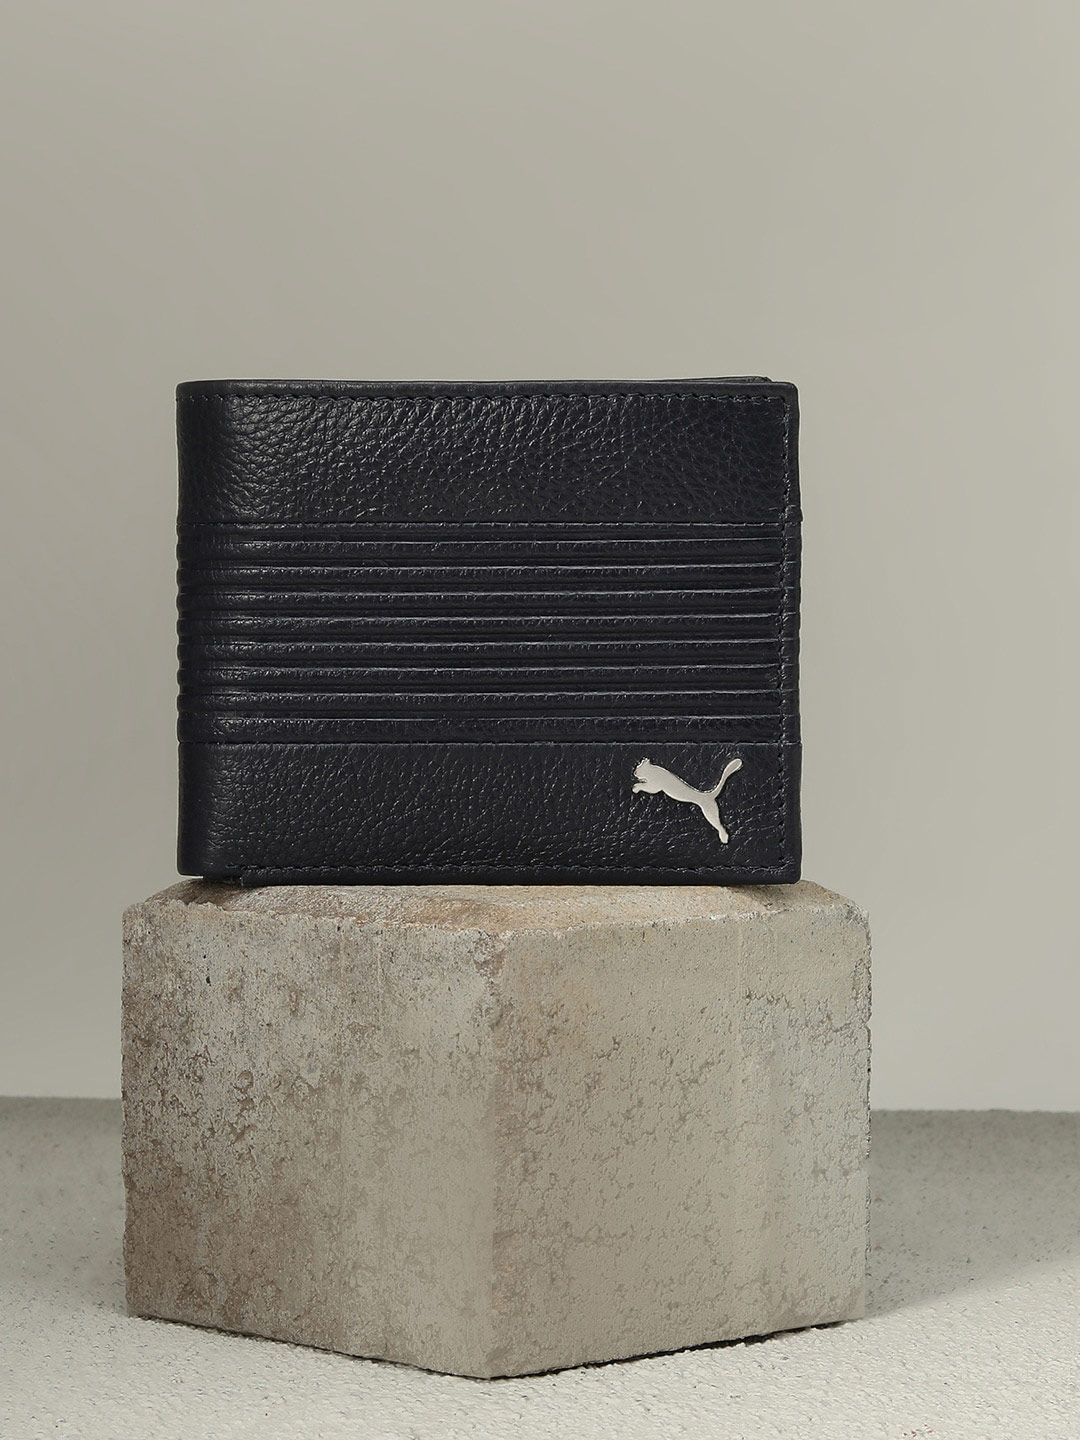 Puma Textured Leather Wallets